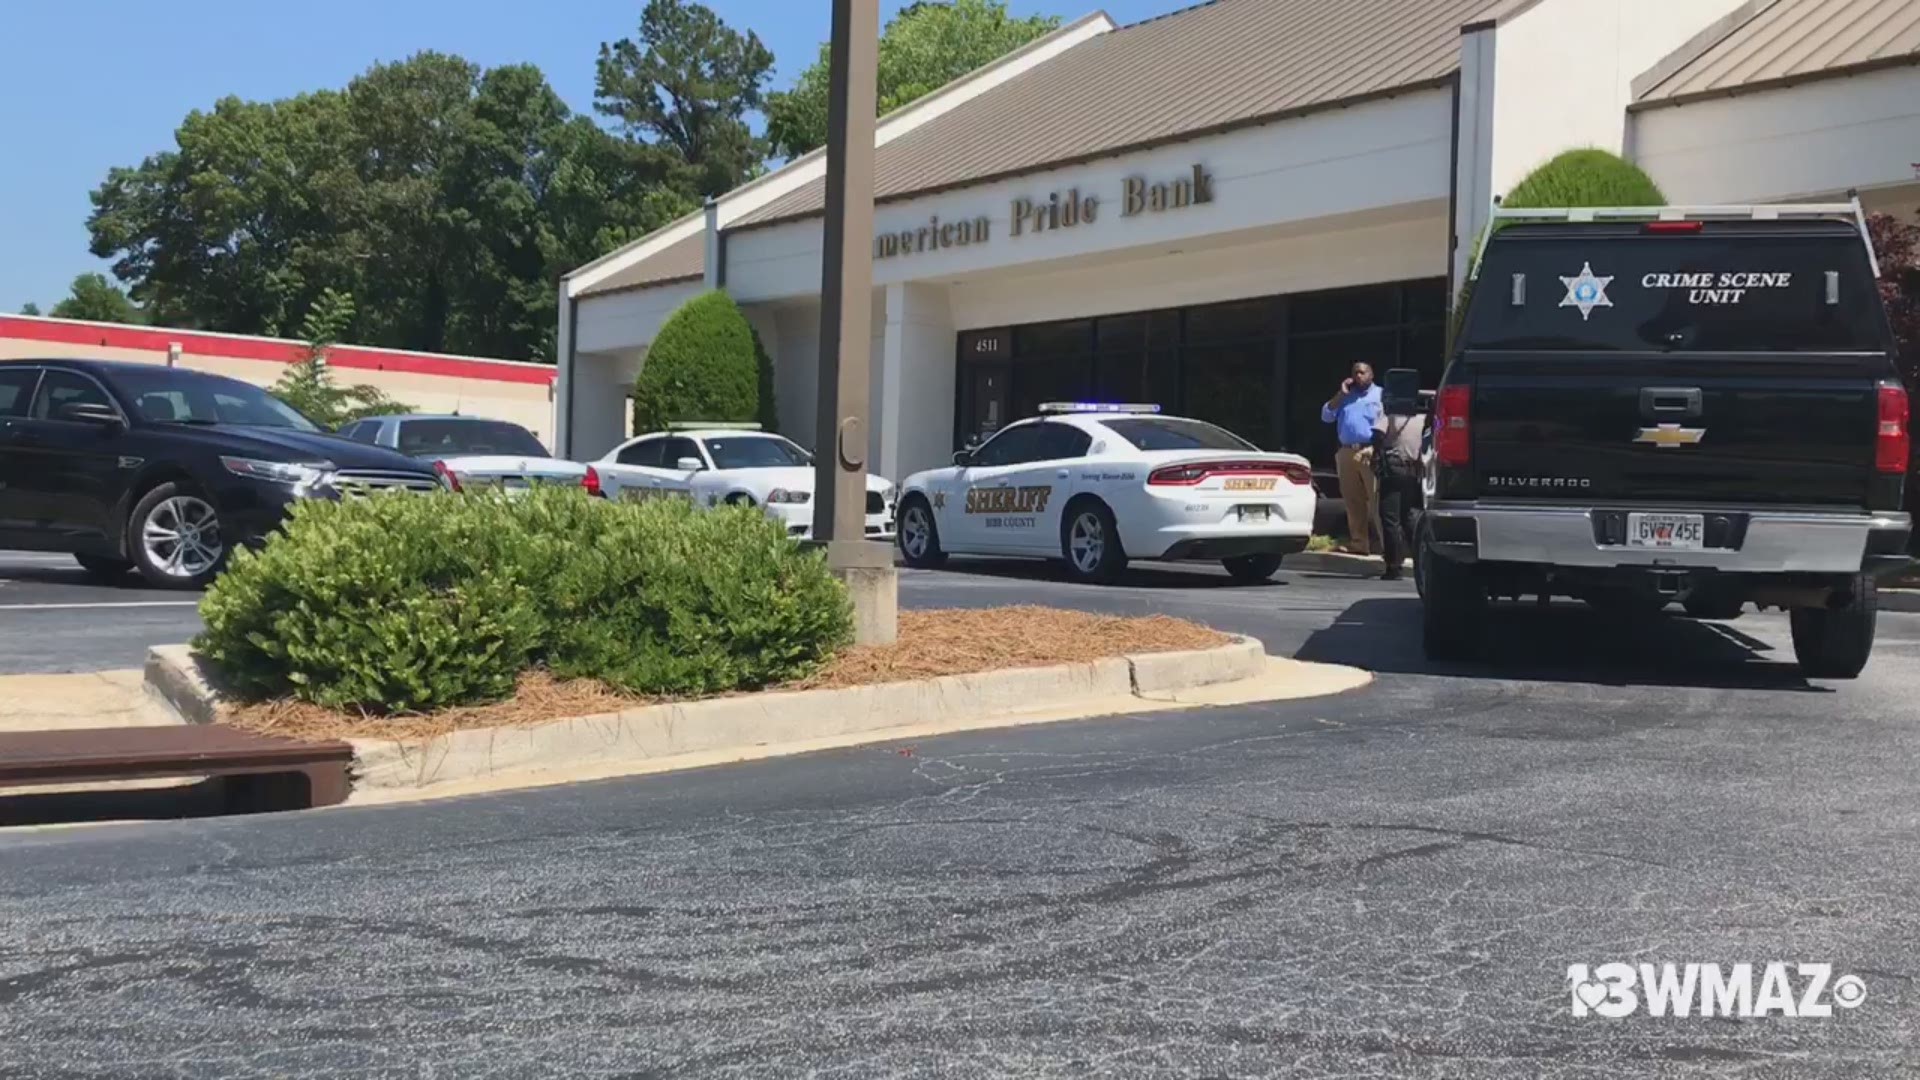 The Bibb County Sheriff's Office is investigating after a robbery took place at the American Pride Bank on Vineville Avenue.